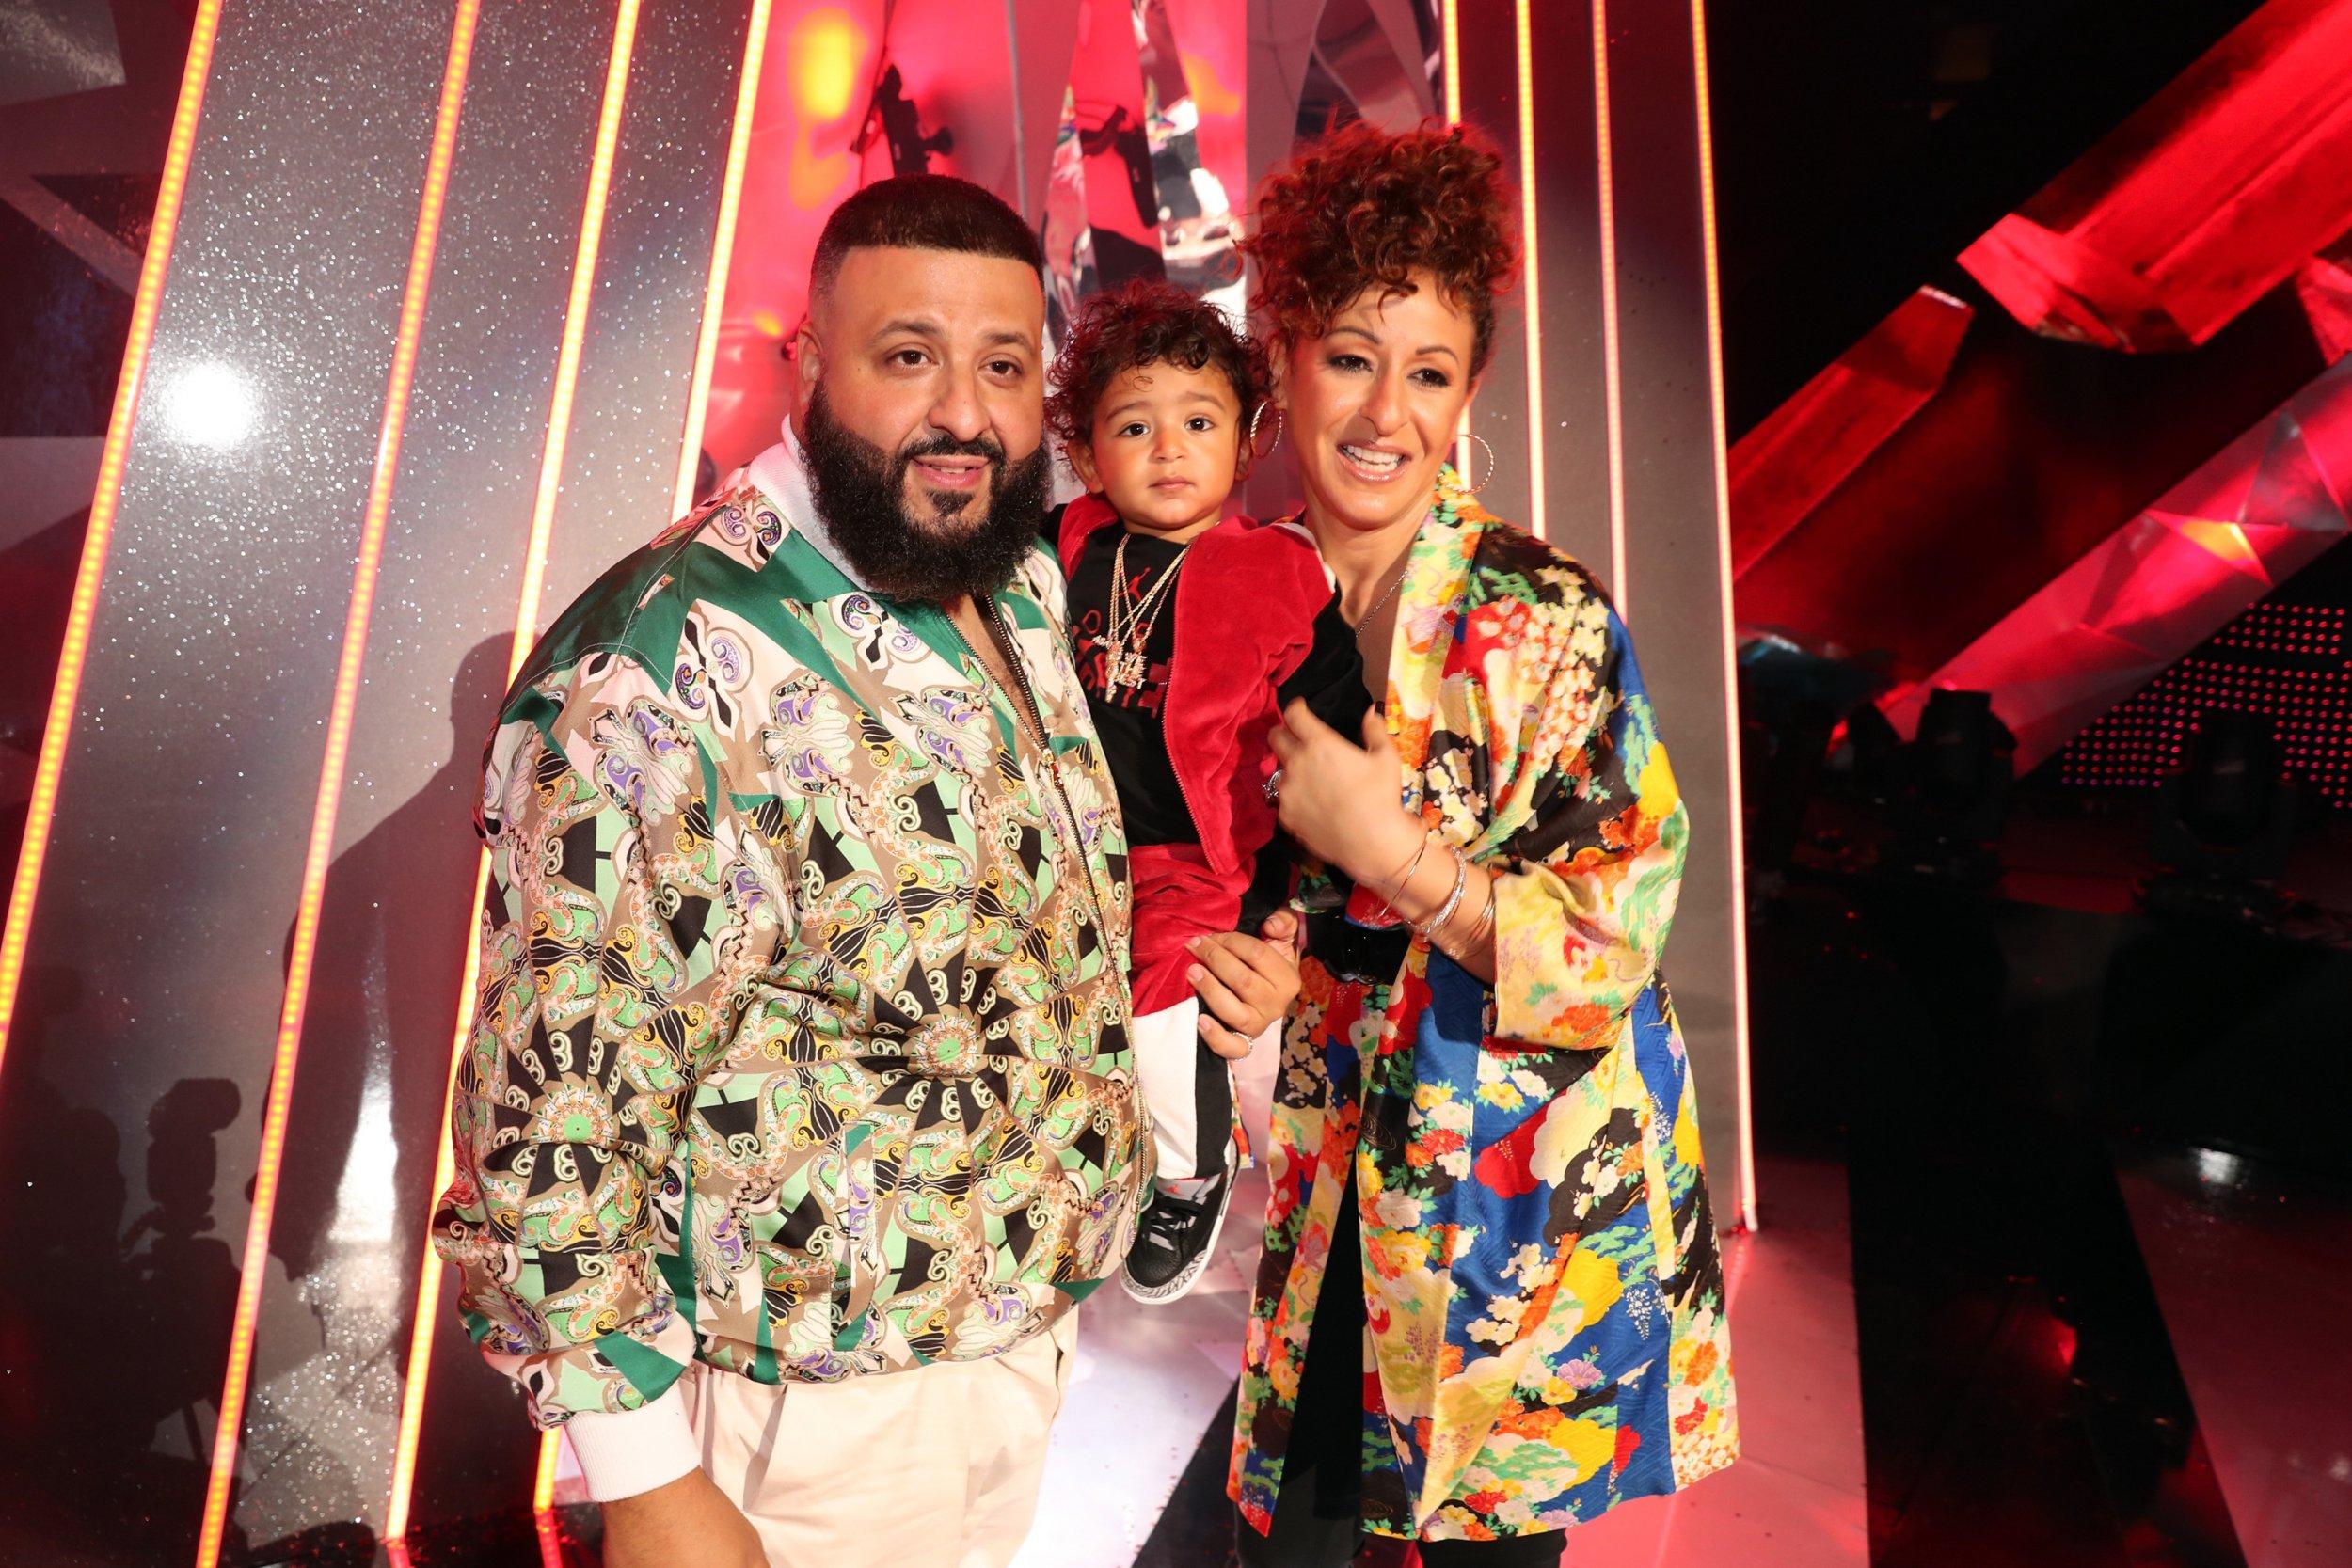 Who Is DJ Khaled's Wife? Nicole Tuck Hilariously Responds to Workout